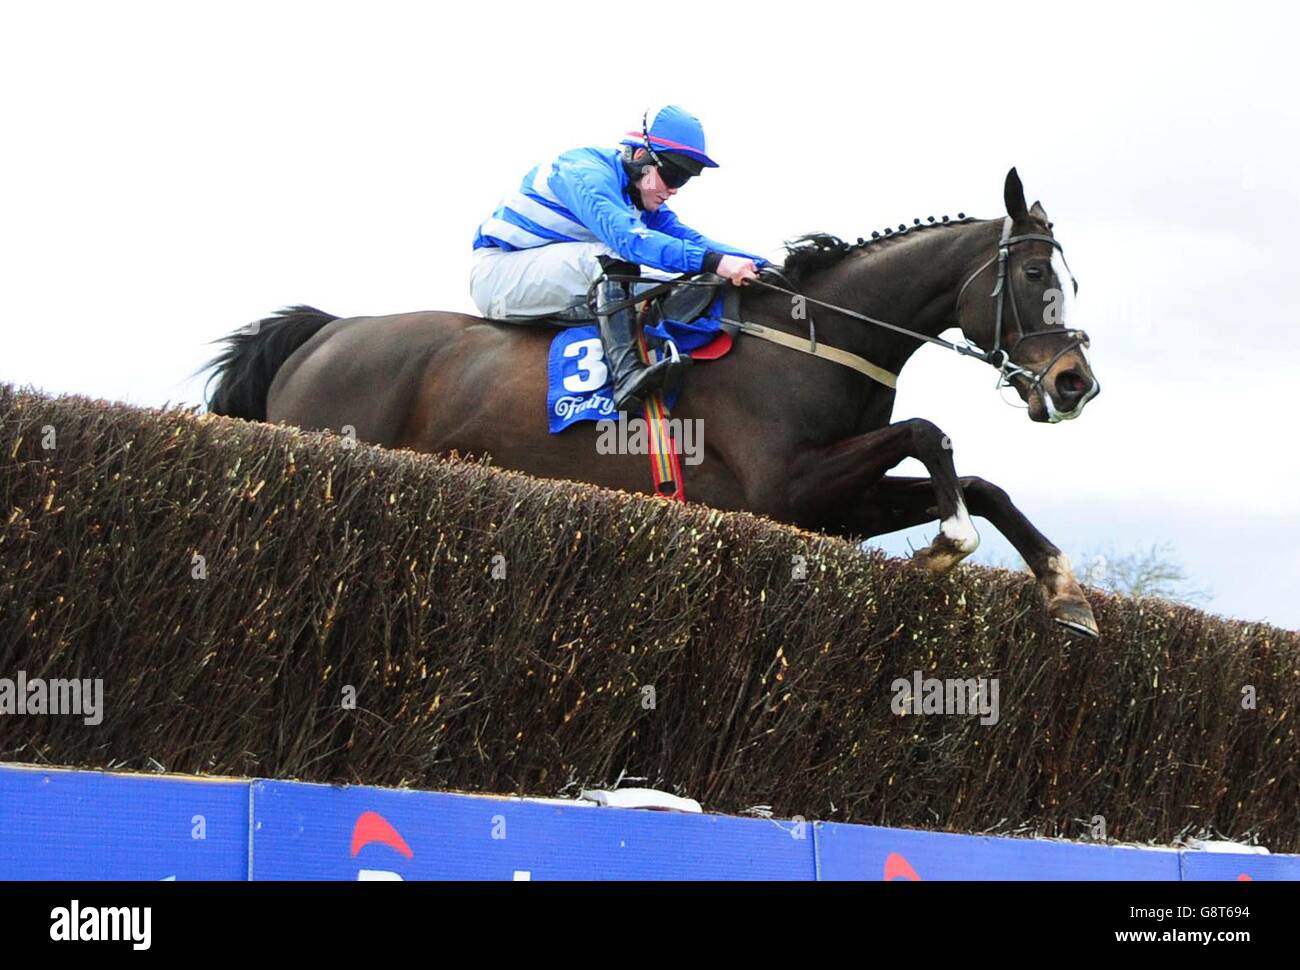 Mr Diablo ridden by Luke Dempsey jumps the last before winning the Fairyhouse Vets Promoting Equine Health Beginners Chase during day three of the Easter Festival at Fairyhouse Racecourse, Co. Meath, Ireland. Stock Photo